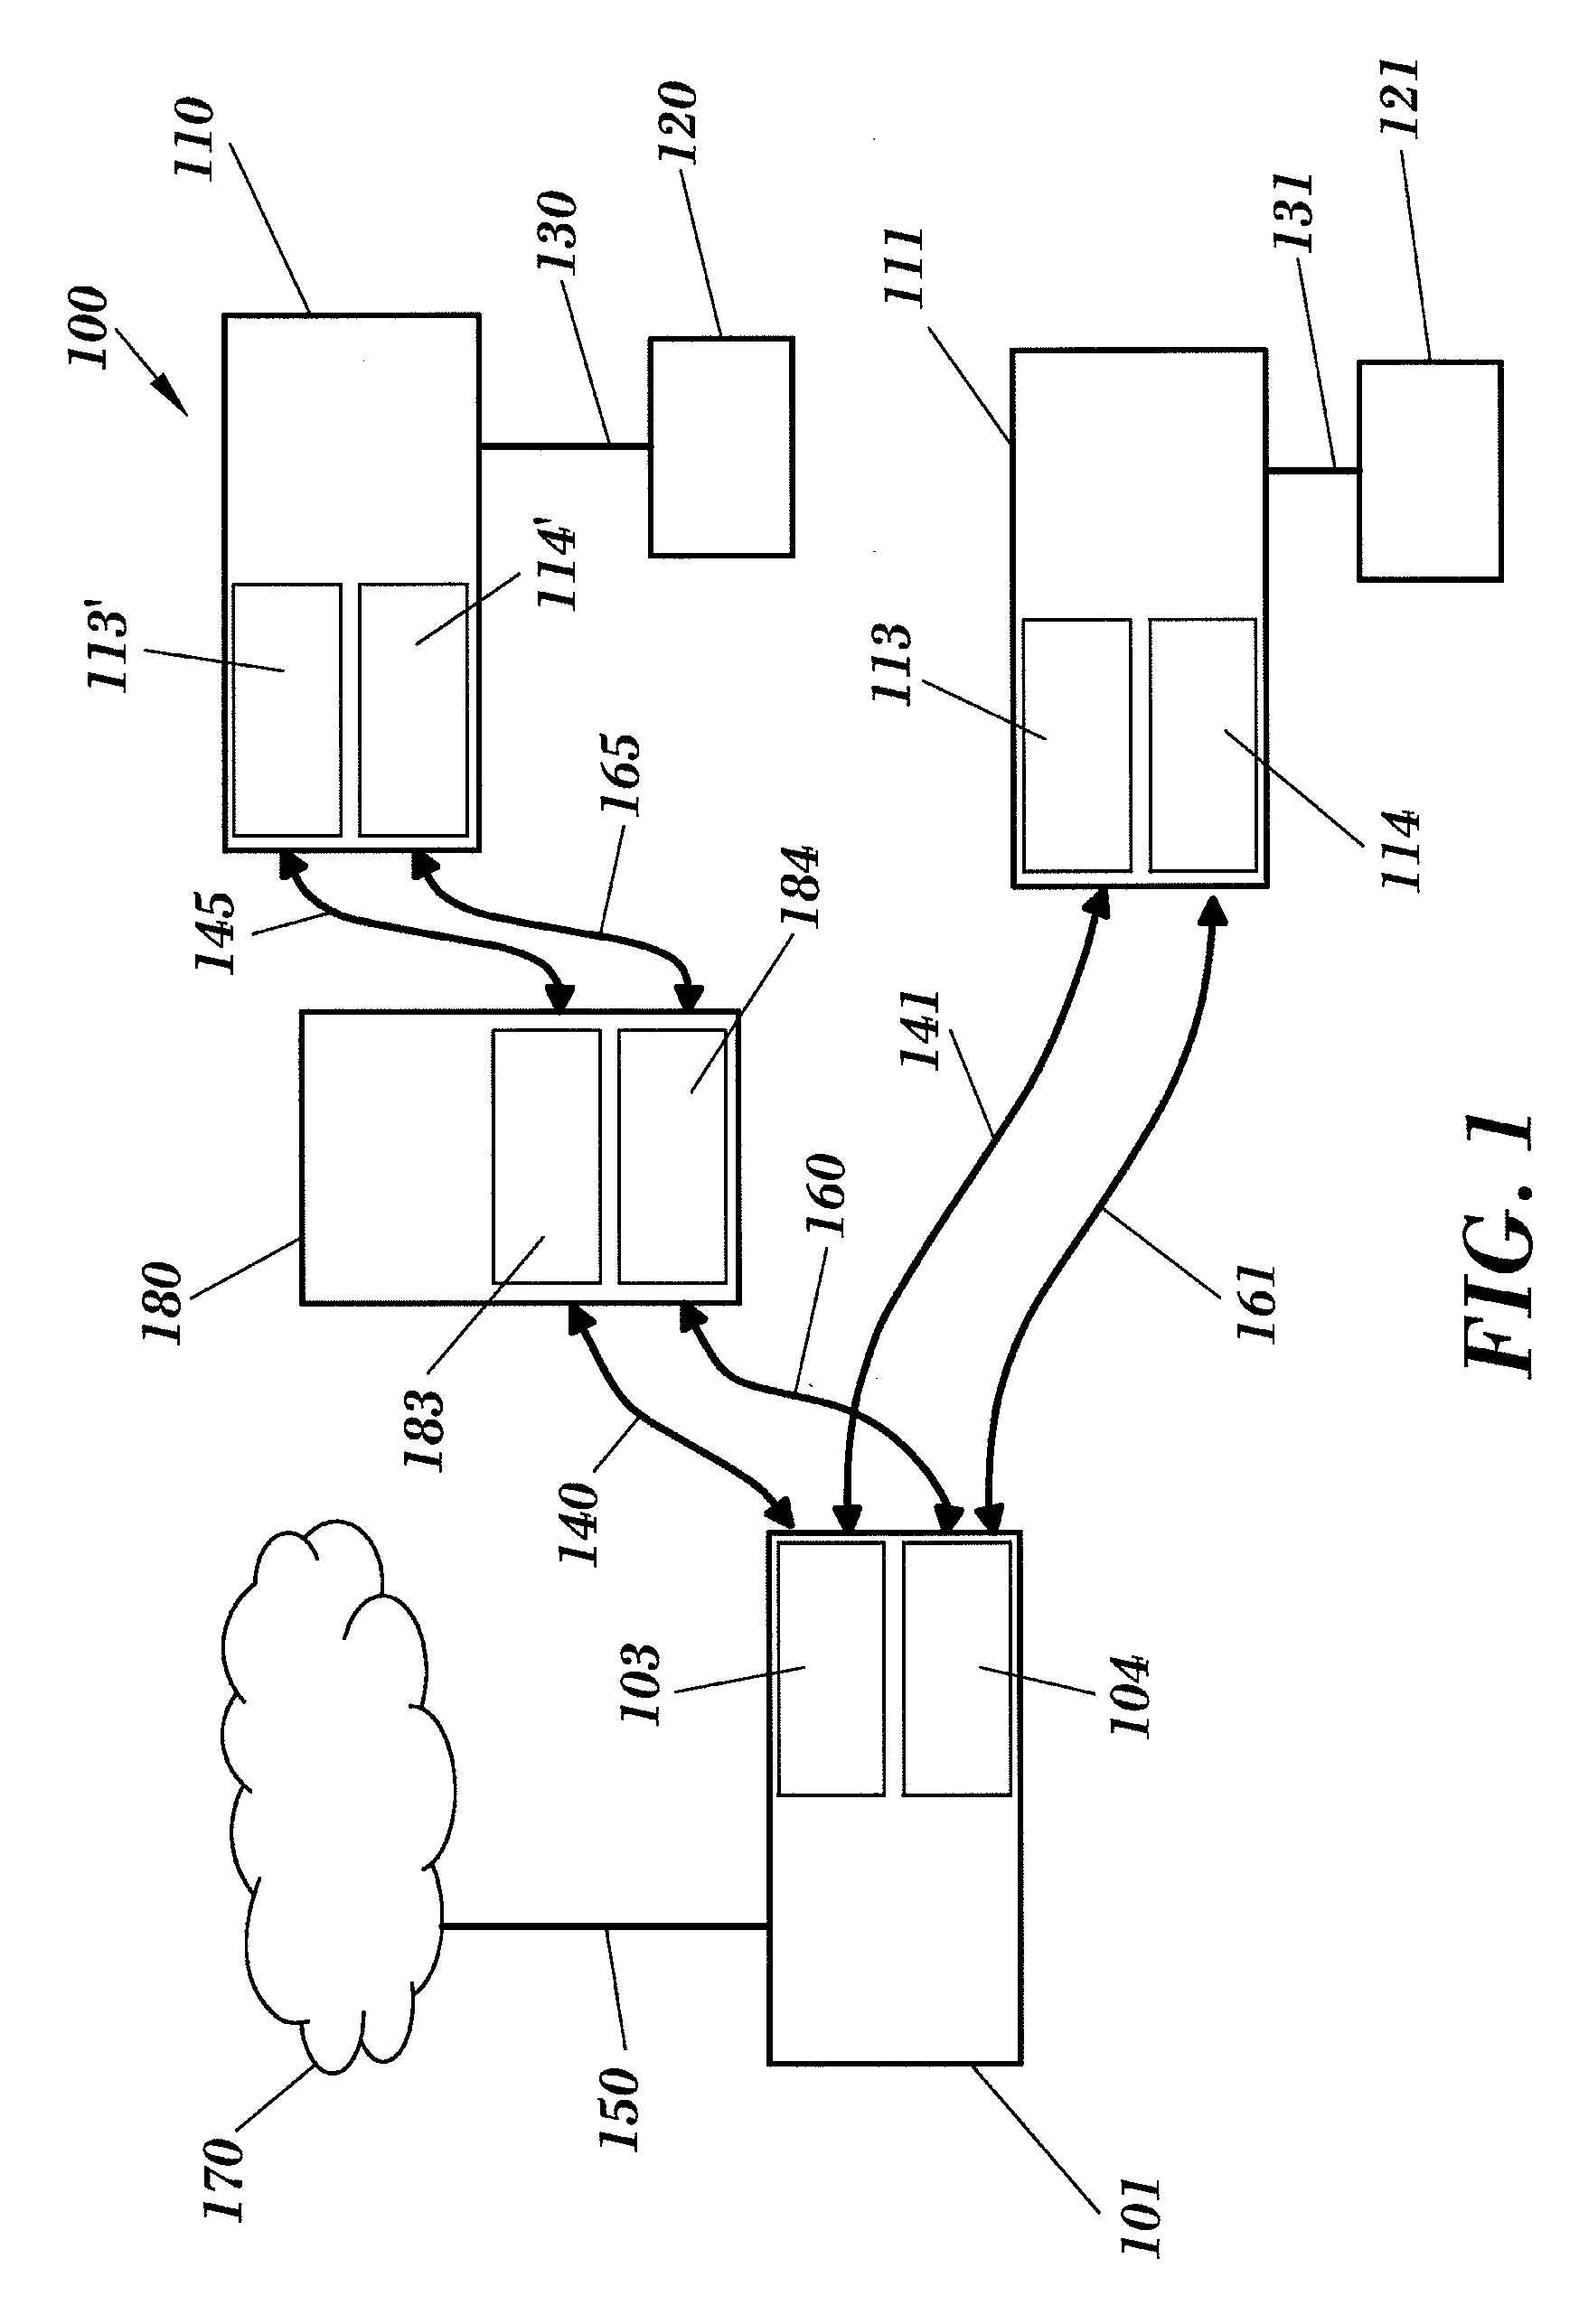 System for distributing broadband wireless signals indoors